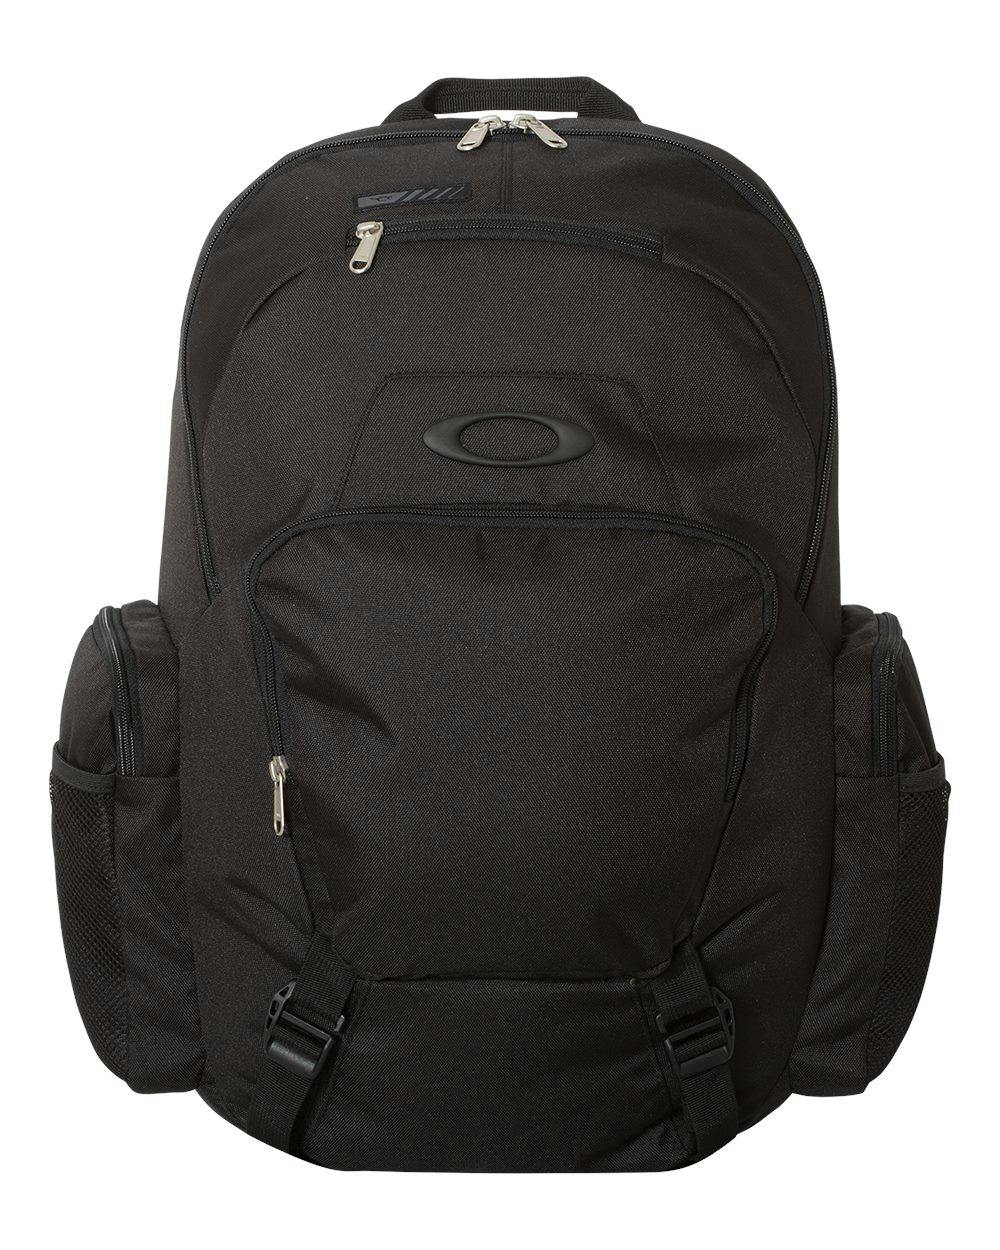 Image for 30L Blade Backpack - FOS901100